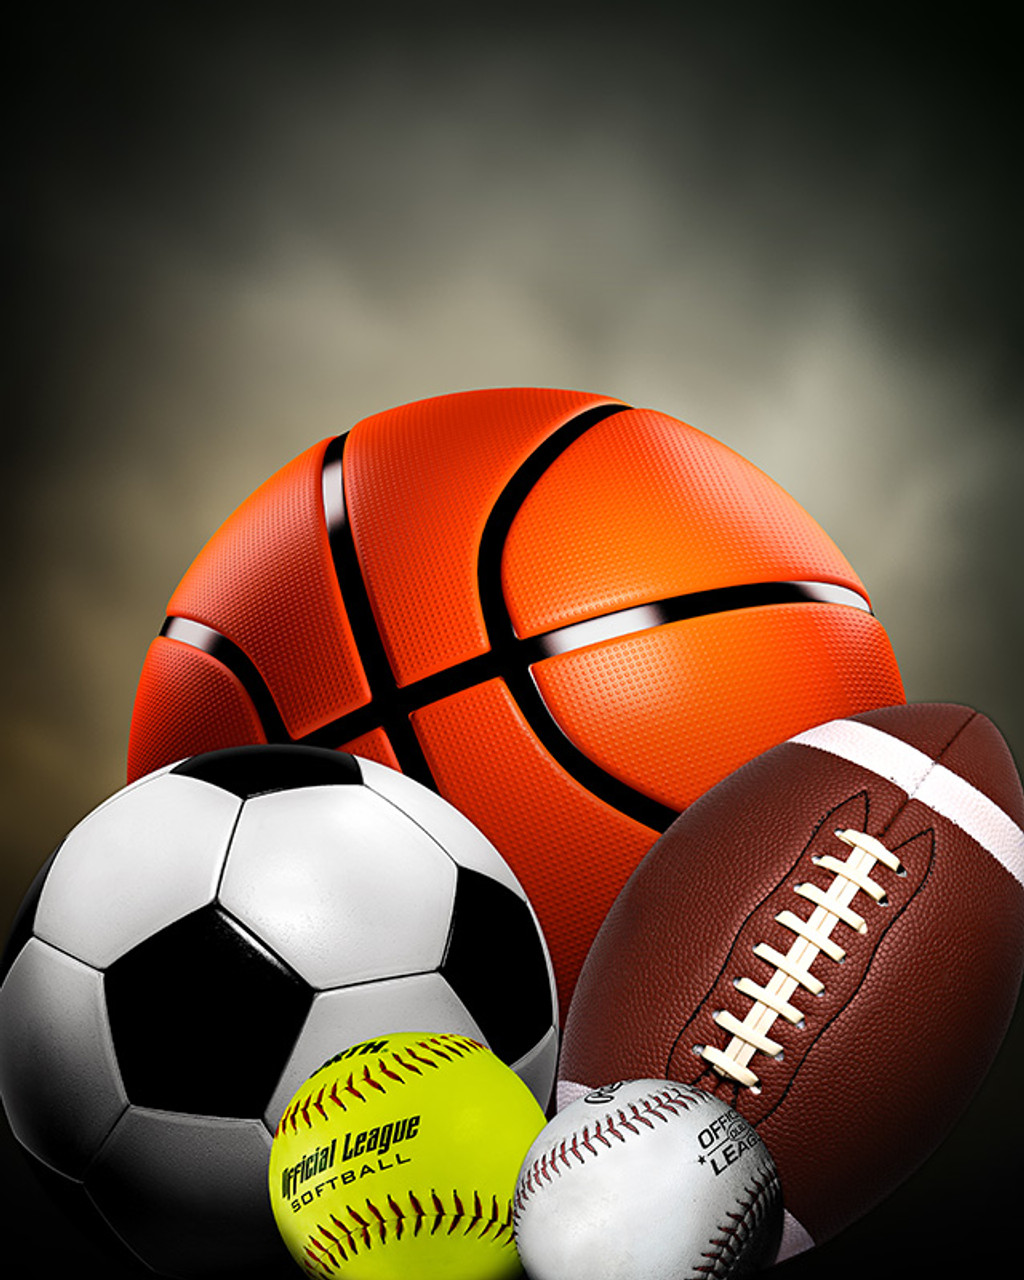 FREE SPORTS BACKGROUND - SPORTS COLLECTION